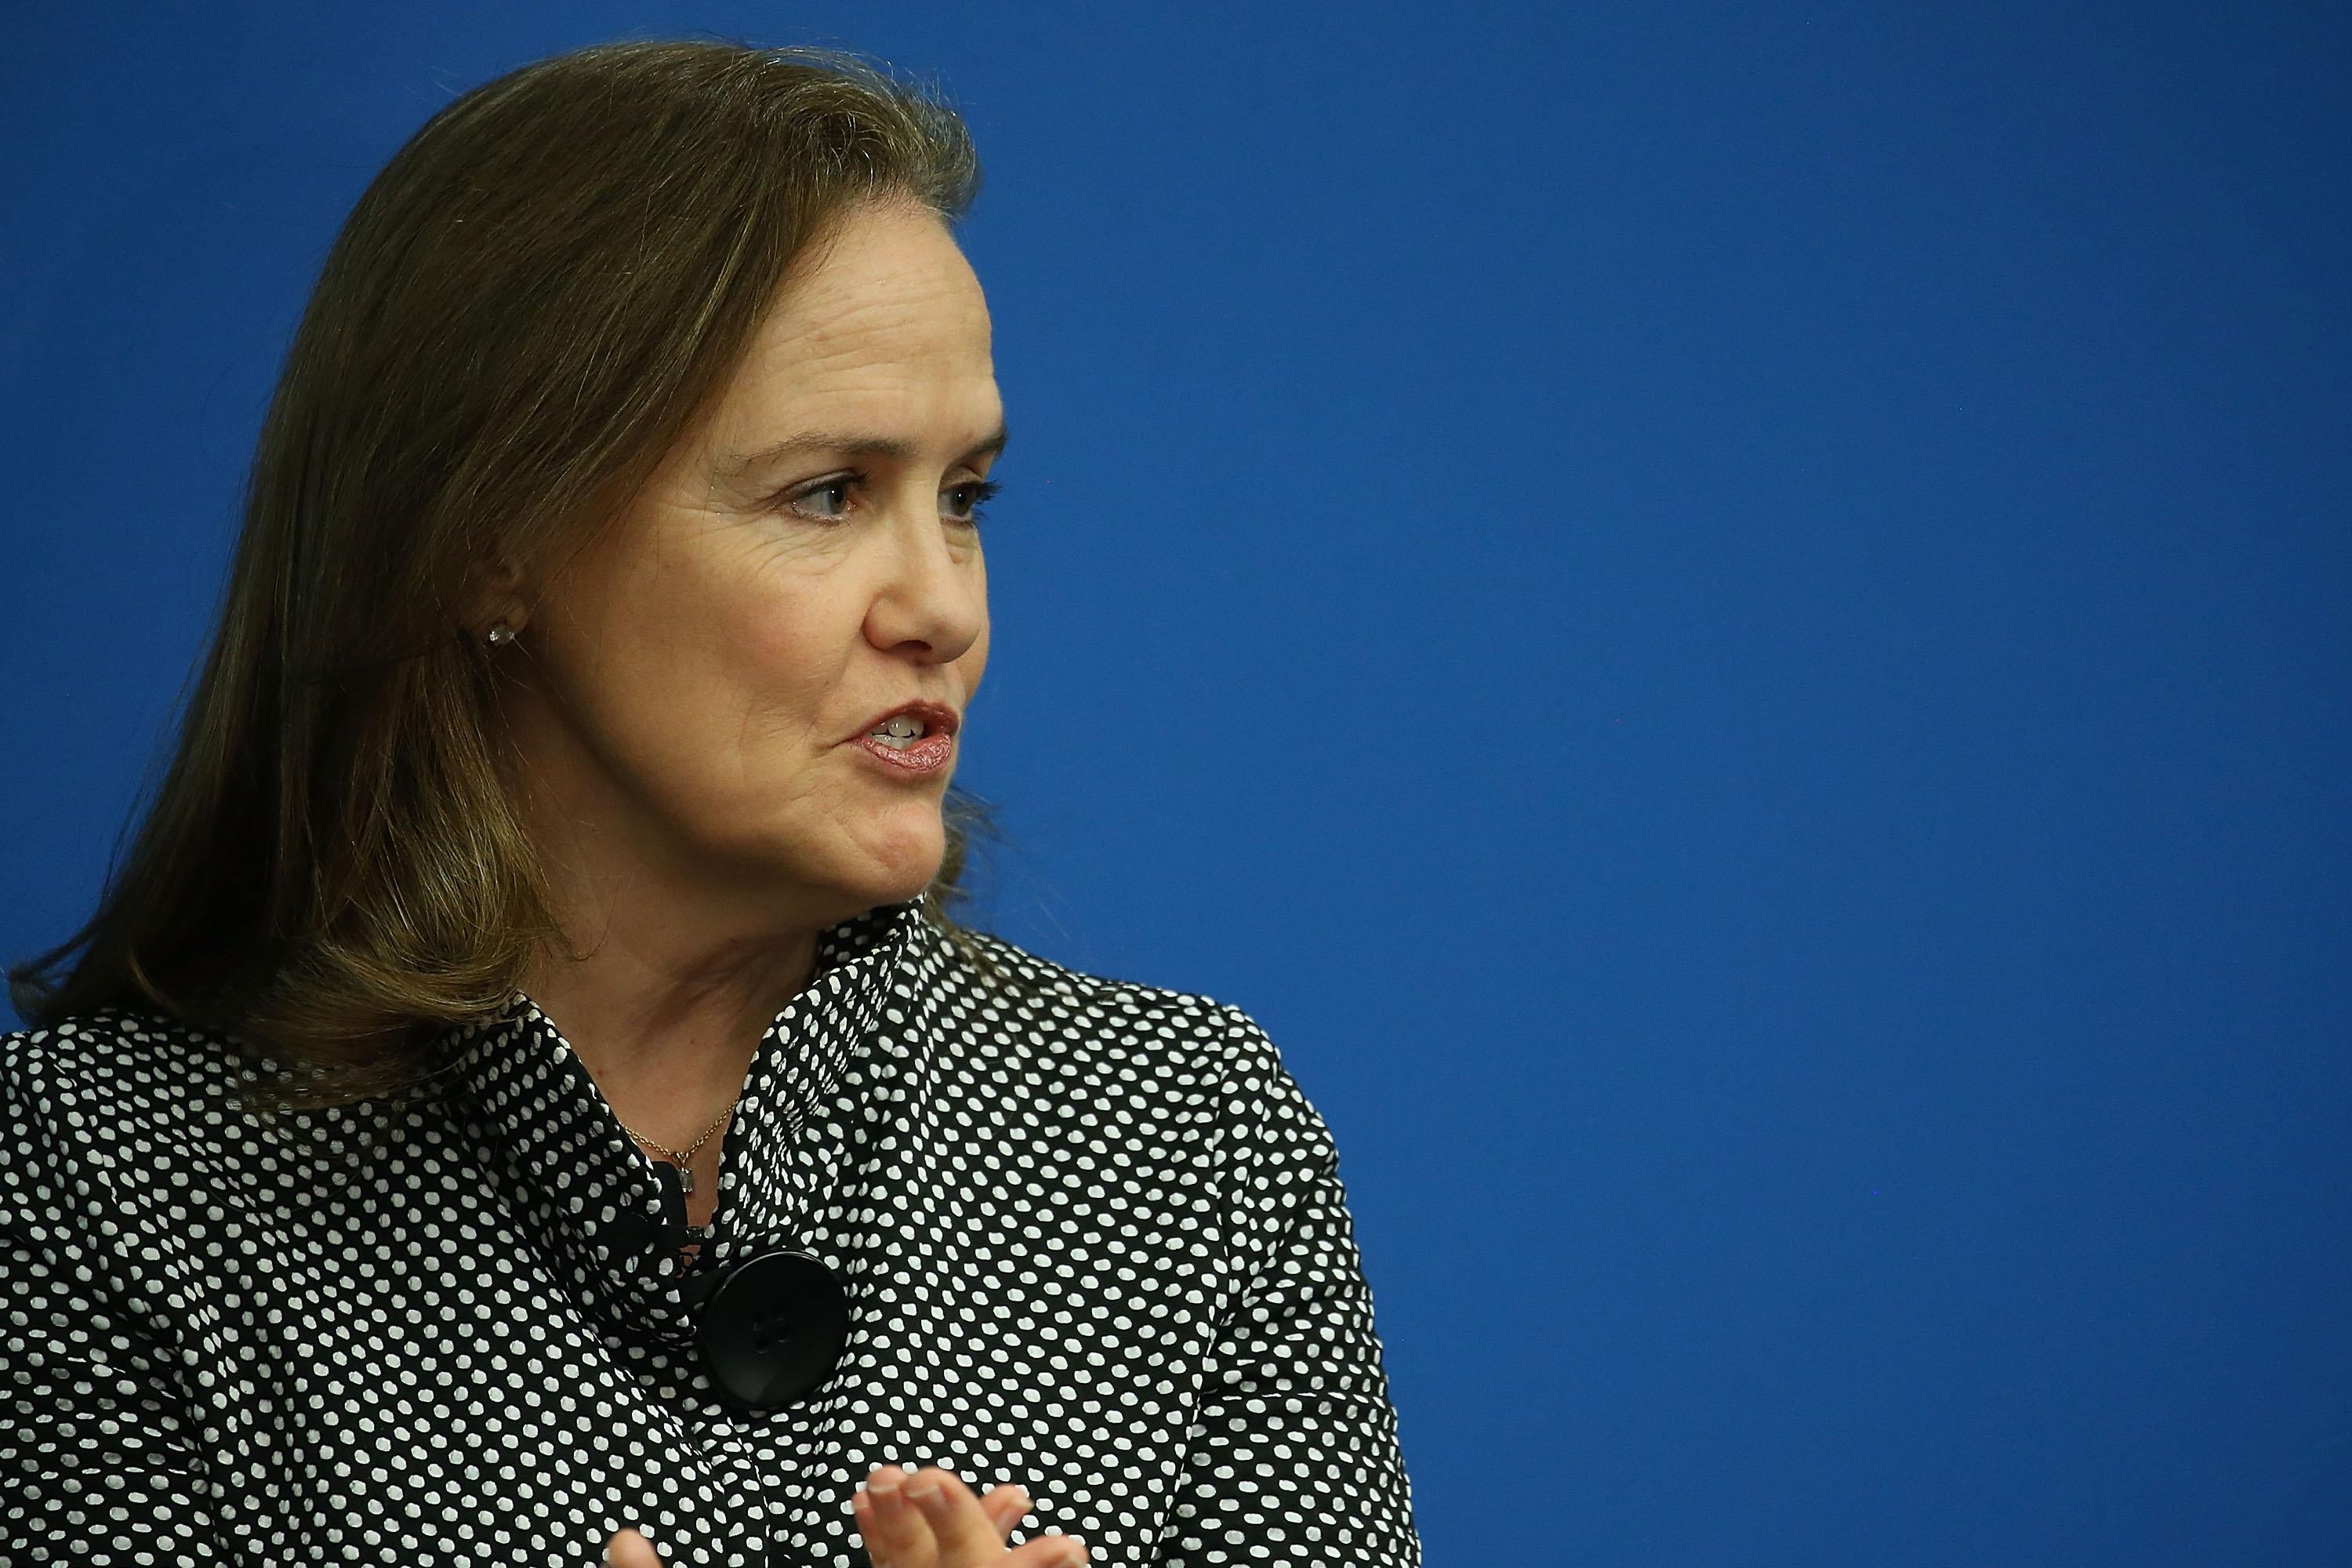 Flournoy gestures with her hands while speaking in front of a blue background.